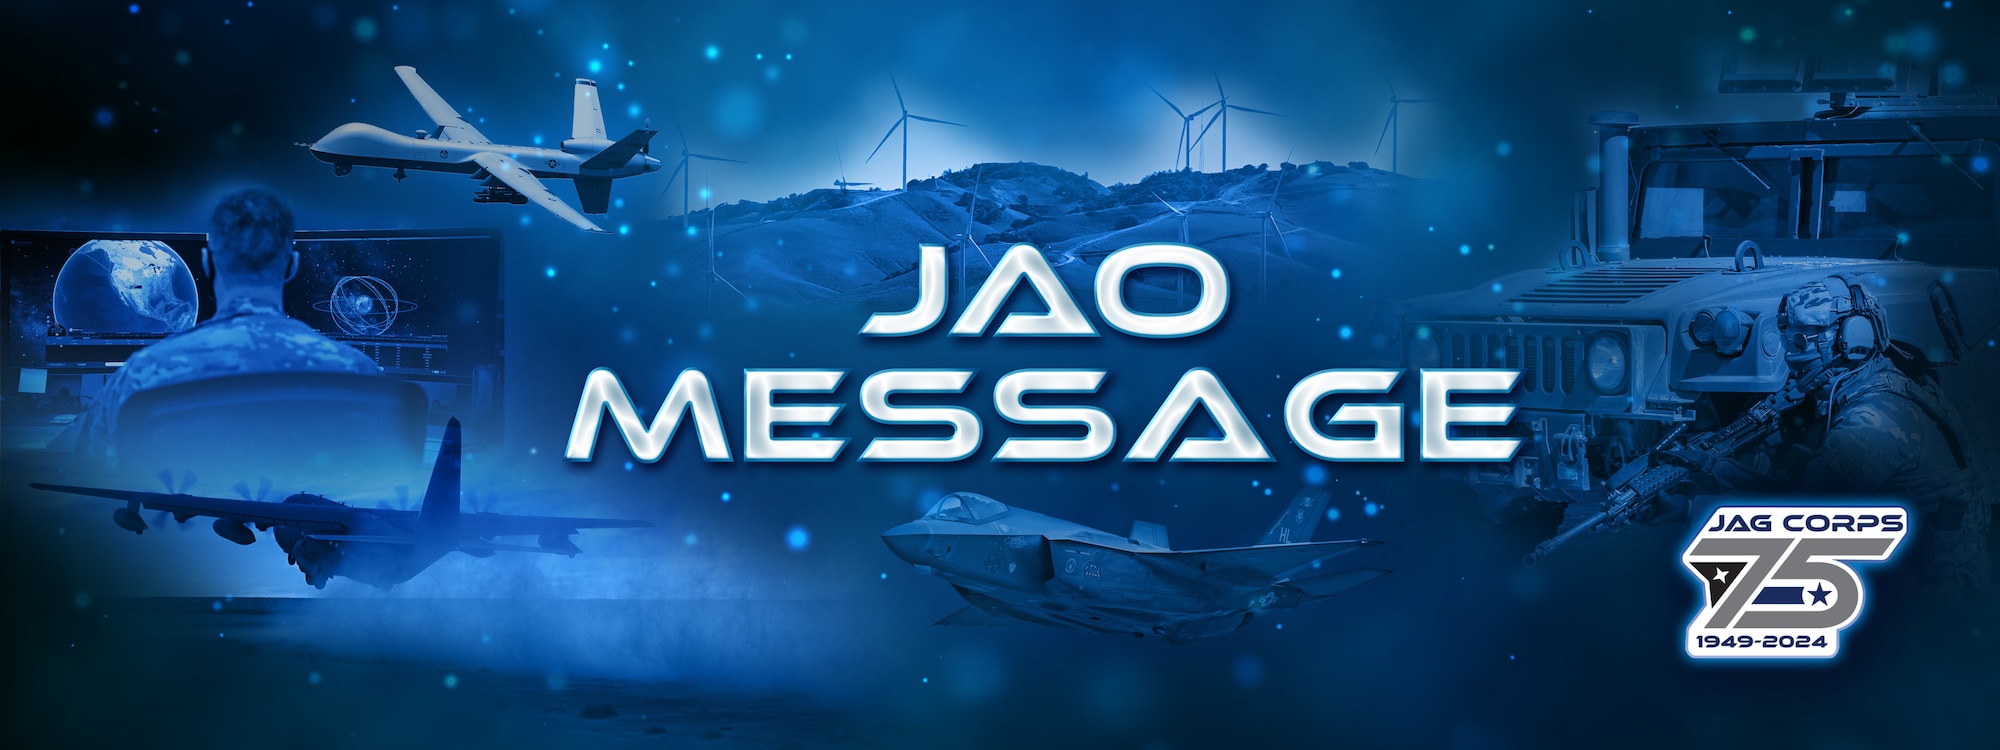 JAO Message. Modified Illustration: Collage of Air Force images over glitter background © k_e_n /Adobe Stock [image is not public domain]